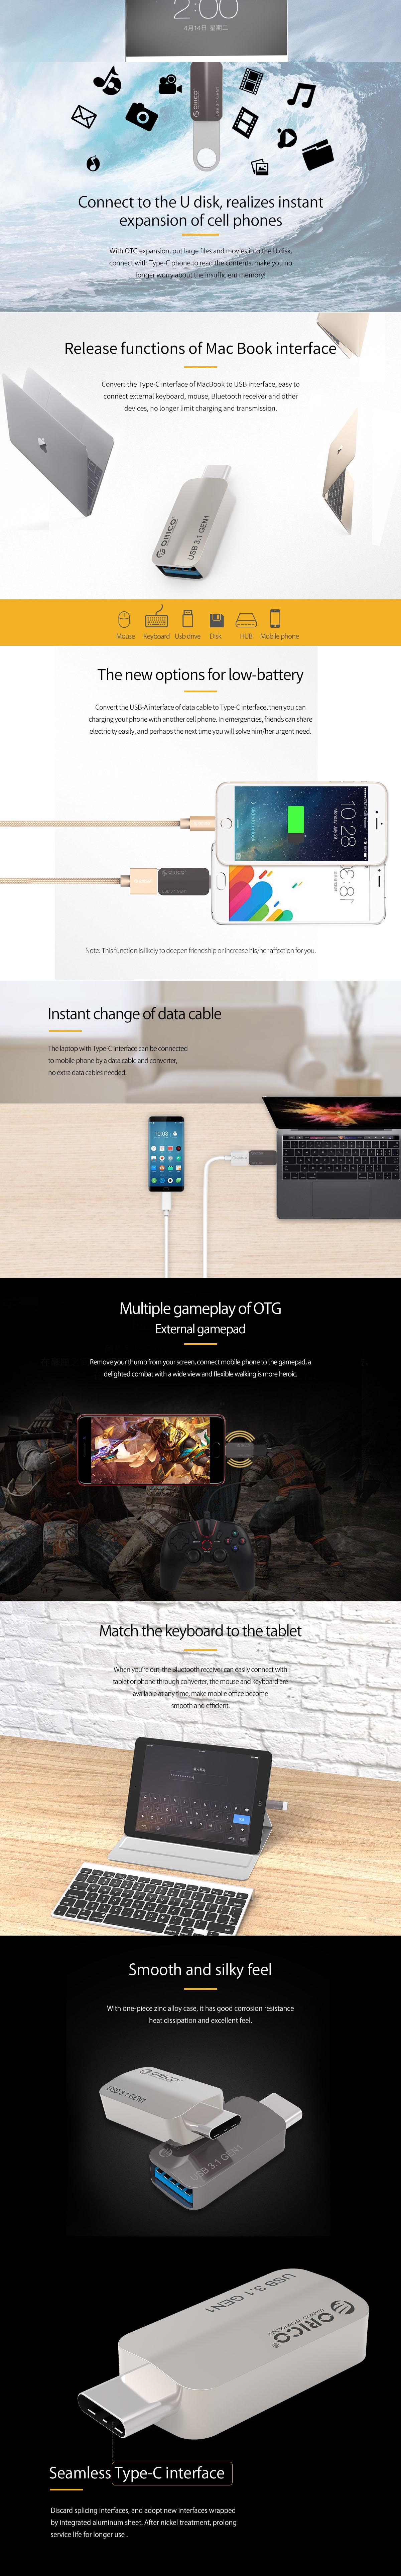 A large marketing image providing additional information about the product ORICO 3A Type-C to USB-A OTG Adapter - Additional alt info not provided